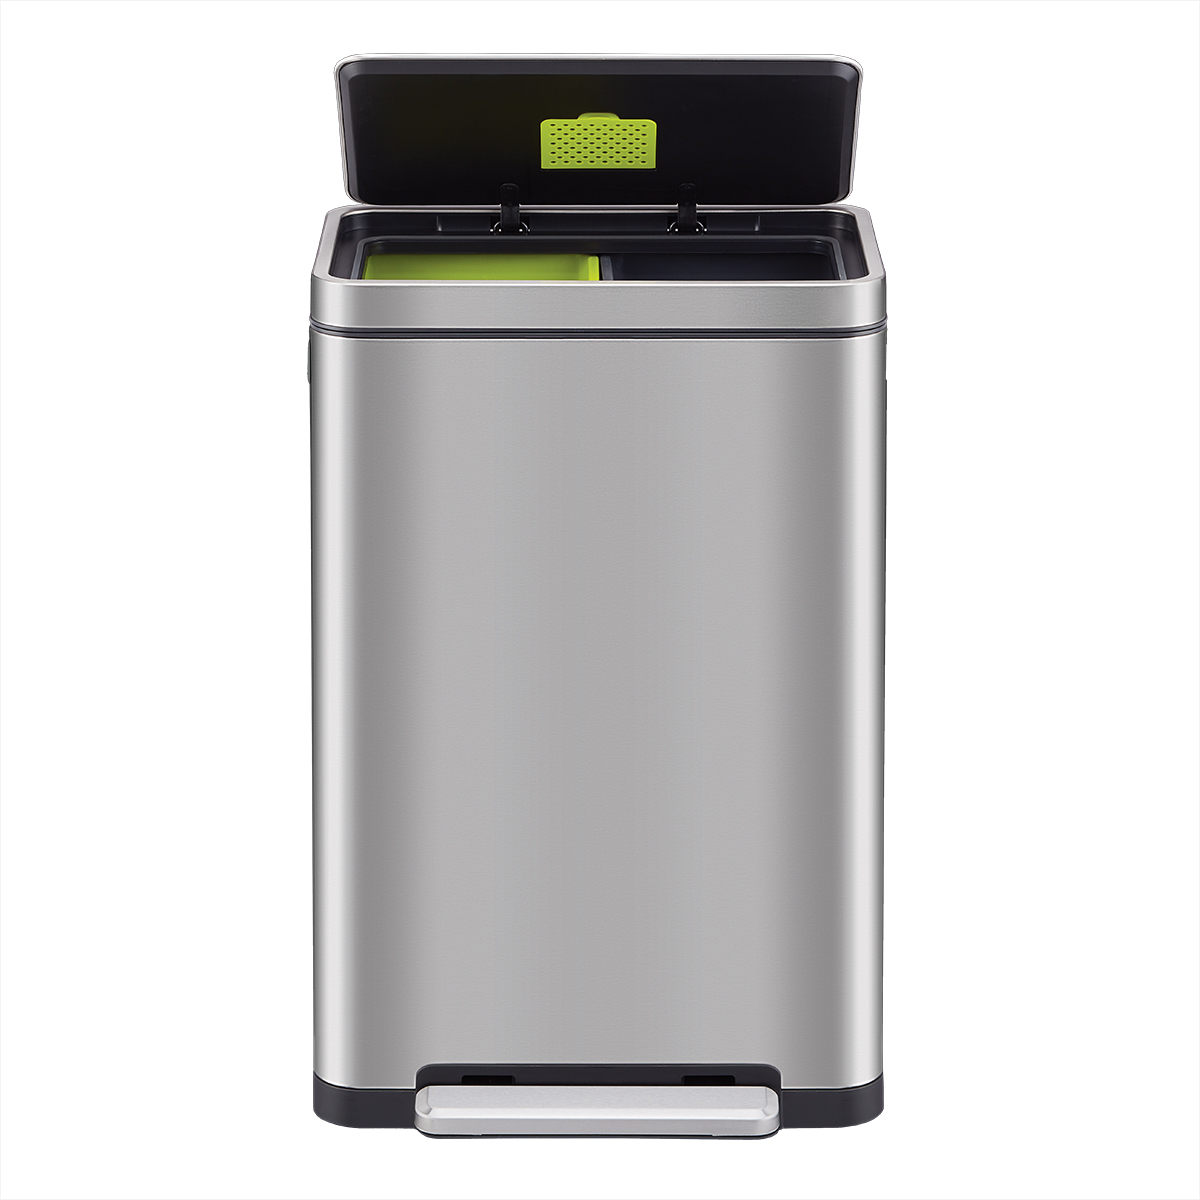 https://www.containerstore.com/catalogimages/405941/10083076-TCS-10gal-dual-recycler-ste.jpg